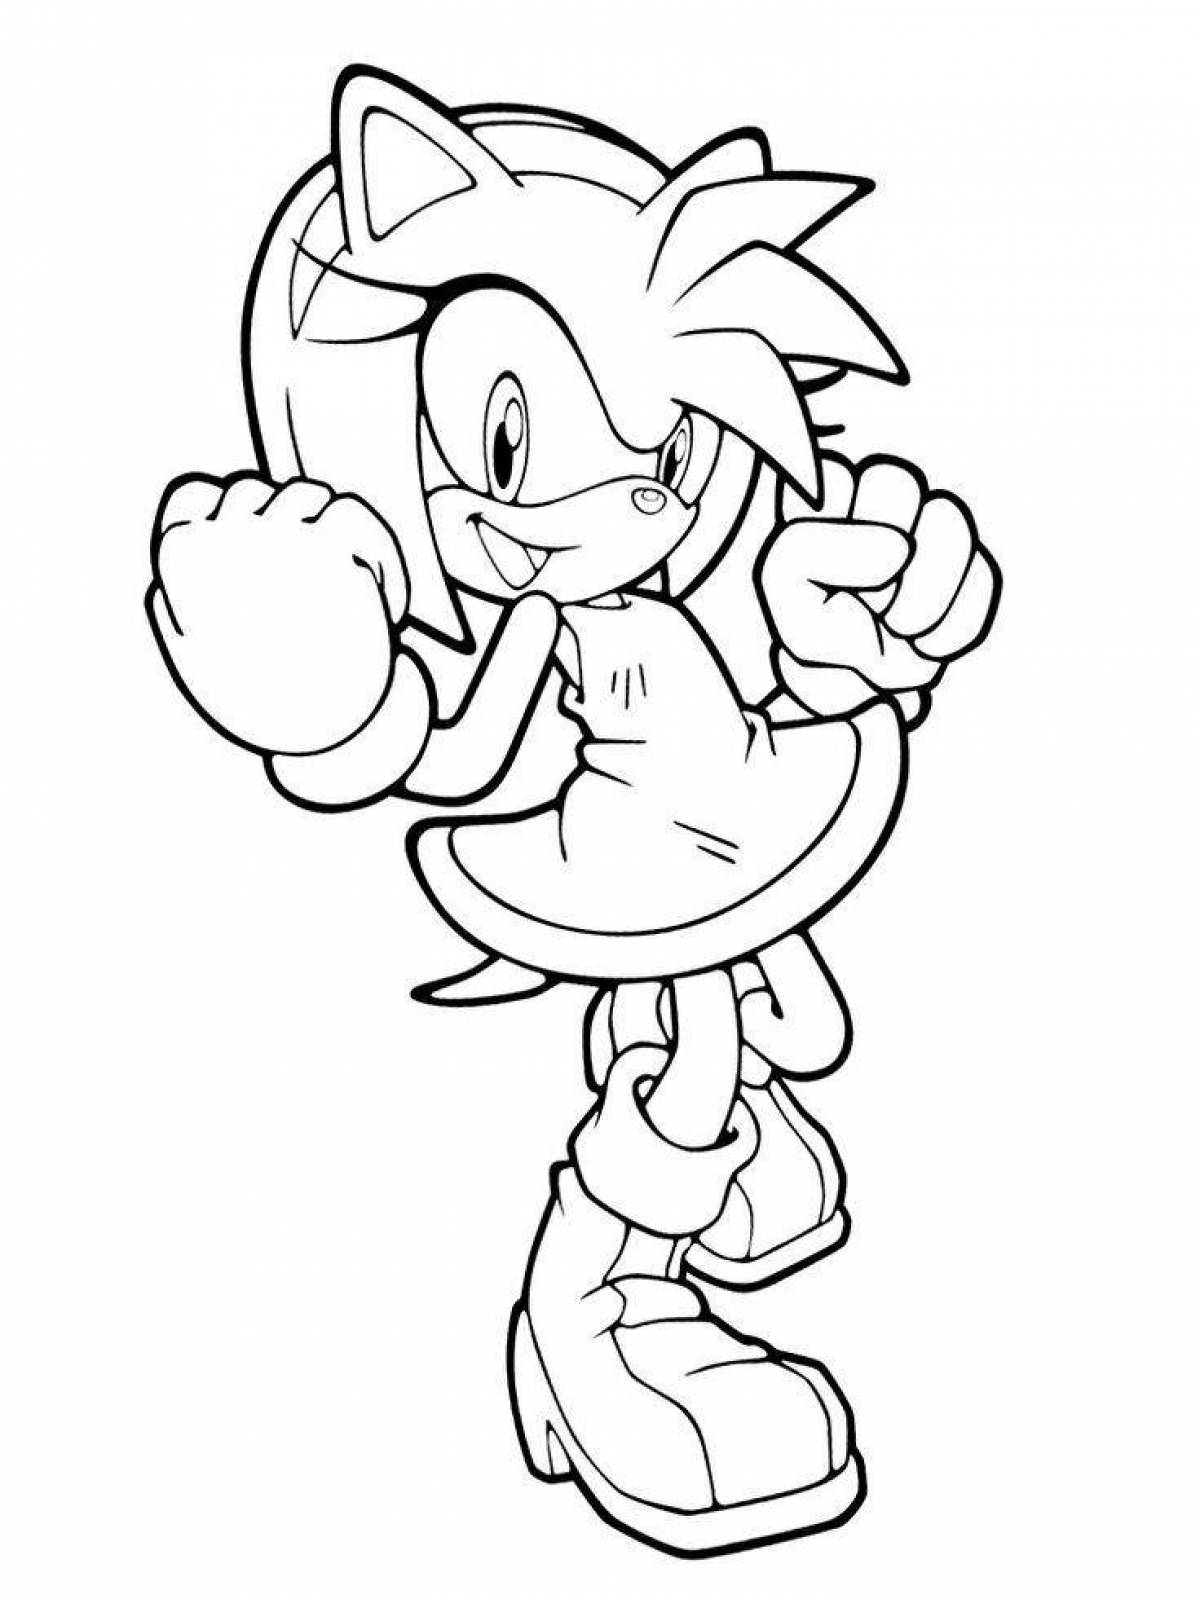 Sparkling sonic coloring book for boys